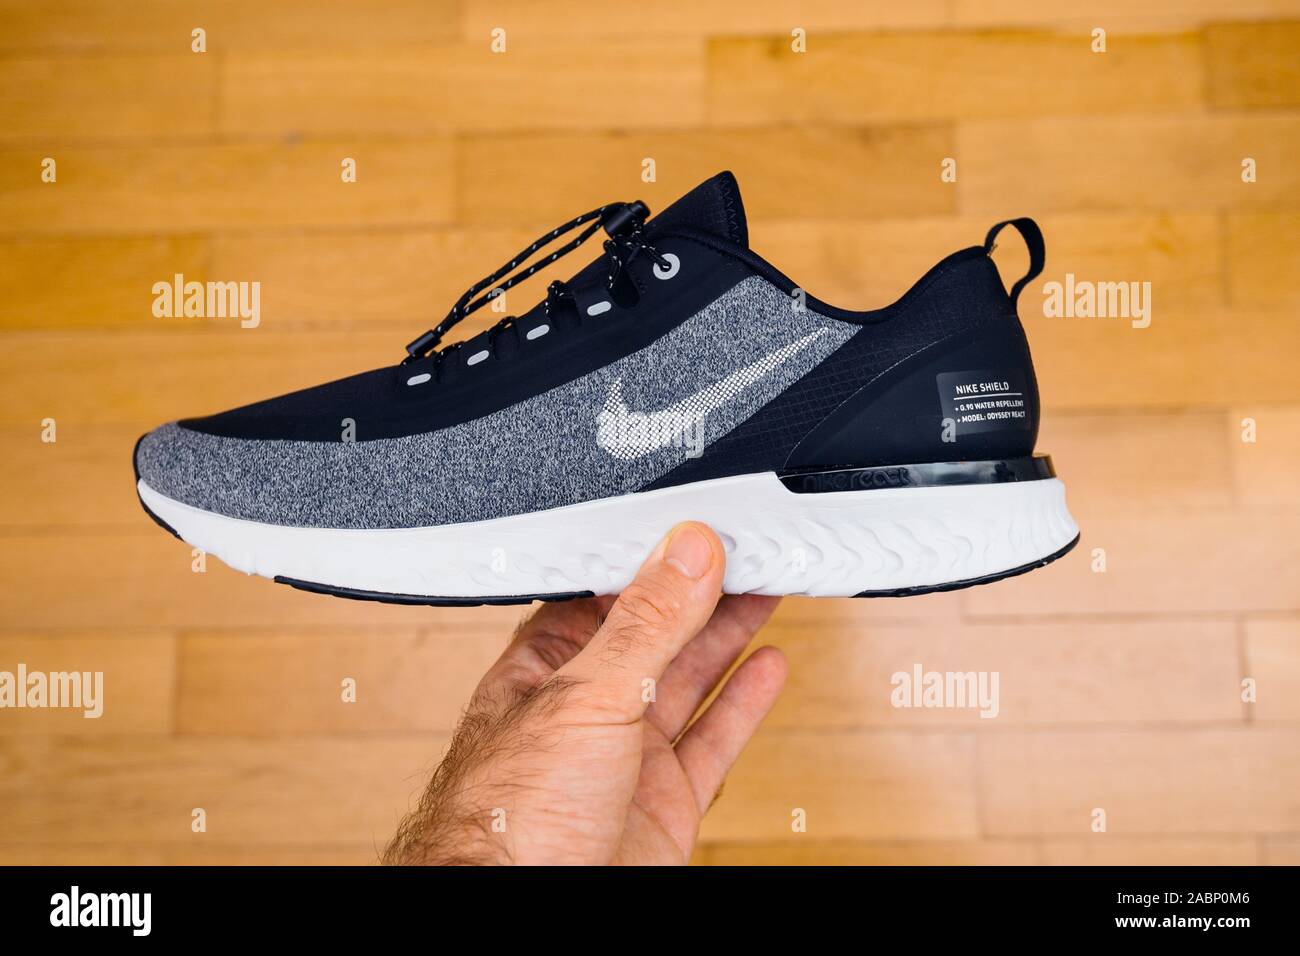 Paris, France - Oct 18, 2019: New edition of waterproof windproof running shoe Nike Odyssey React Shield 2 over wooden background Stock Photo - Alamy